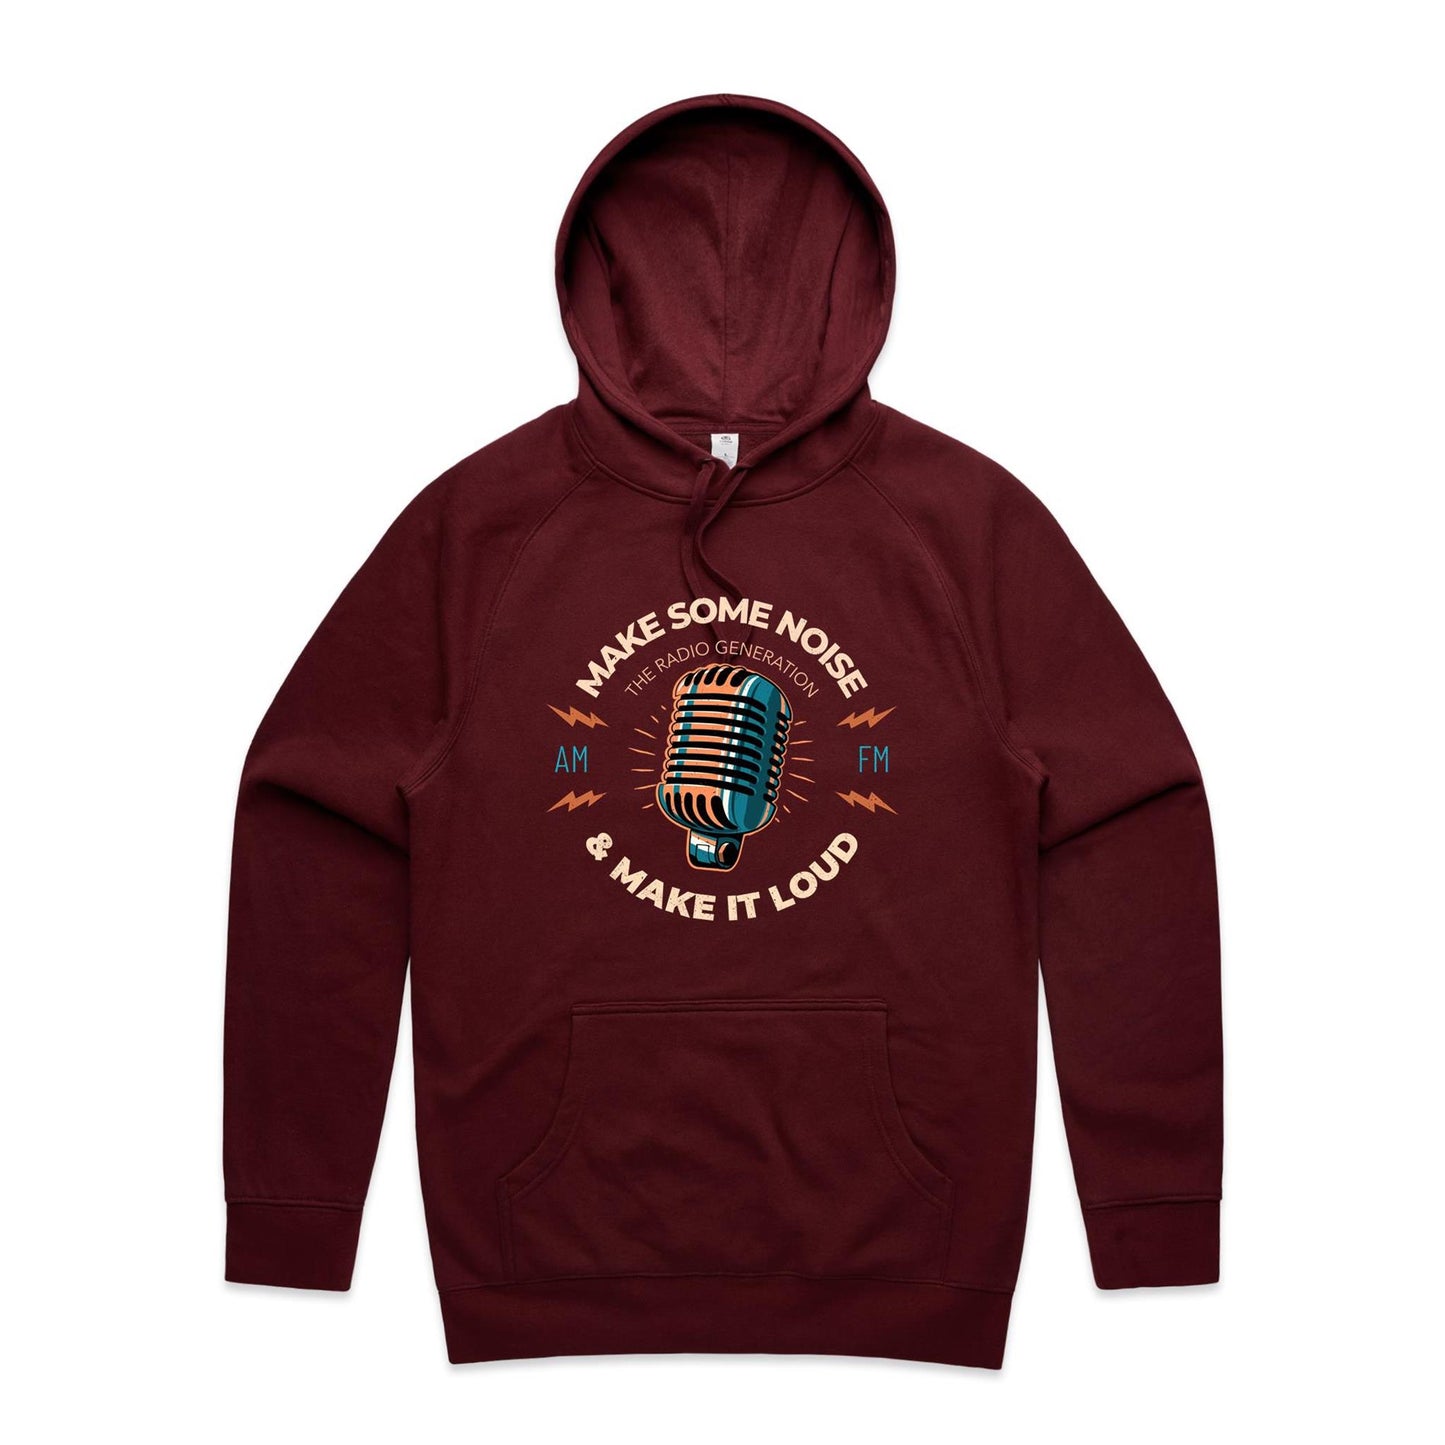 Make Some Noise And Make It Loud - Supply Hood Burgundy Mens Supply Hoodie Music